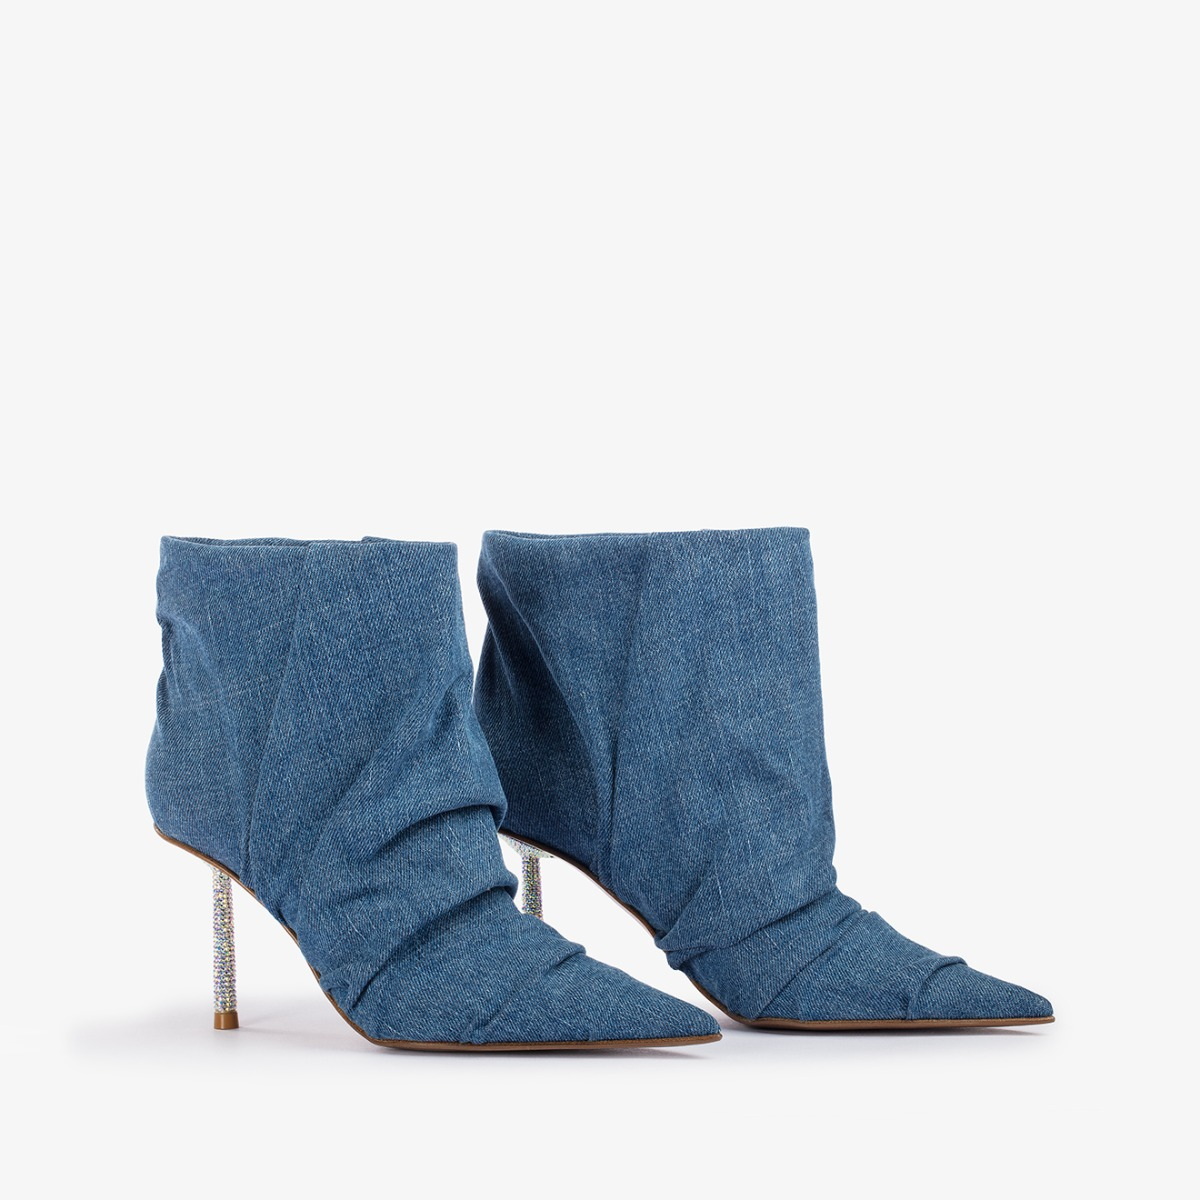 FEDRA ANKLE BOOT 80 mm - Le Silla | Official Online Store